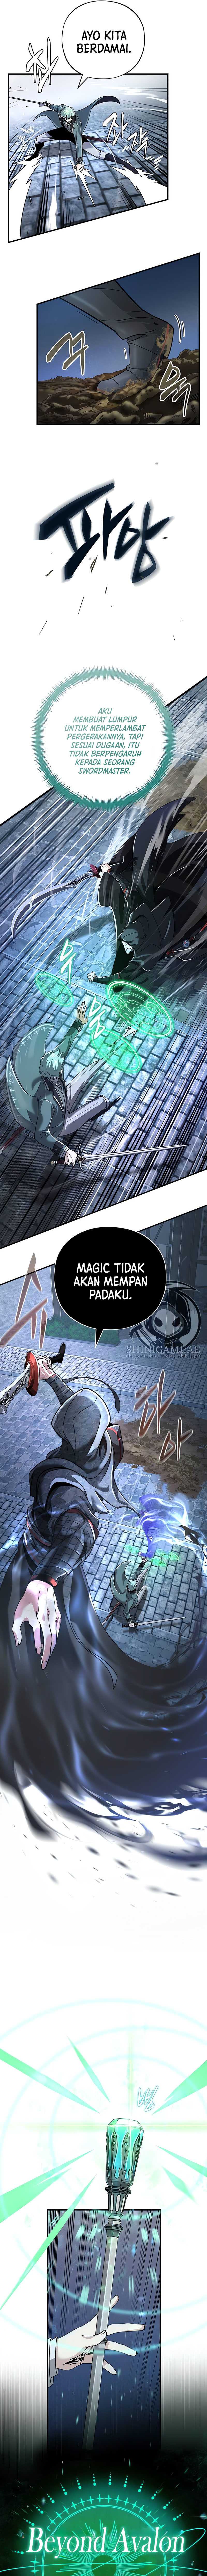 The Dark Magician Transmigrates After 66666 Years Chapter 103